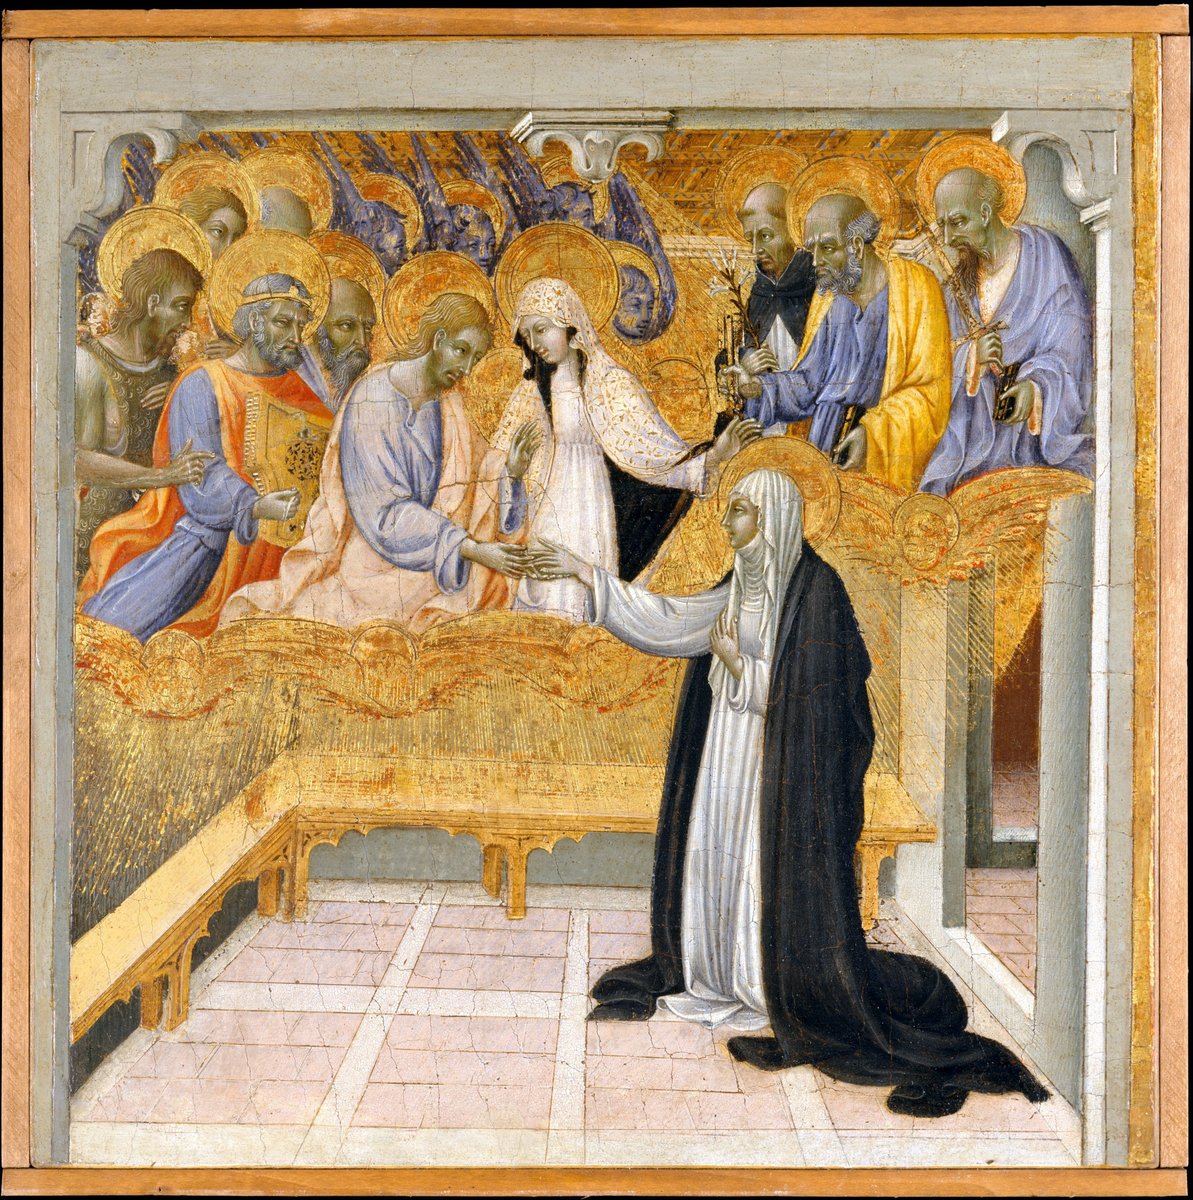 29 April: St Catherine of Siena, Italy (d. 29 April 1380). Lay Dominican Order philosopher & theologian. Canonised 1461 & doctor of the Church. Behind return of Pope from Avignon to Rome during Papal Schism. Experienced stigmata & mystical marriage. 1 of 6 patron saints of Europe